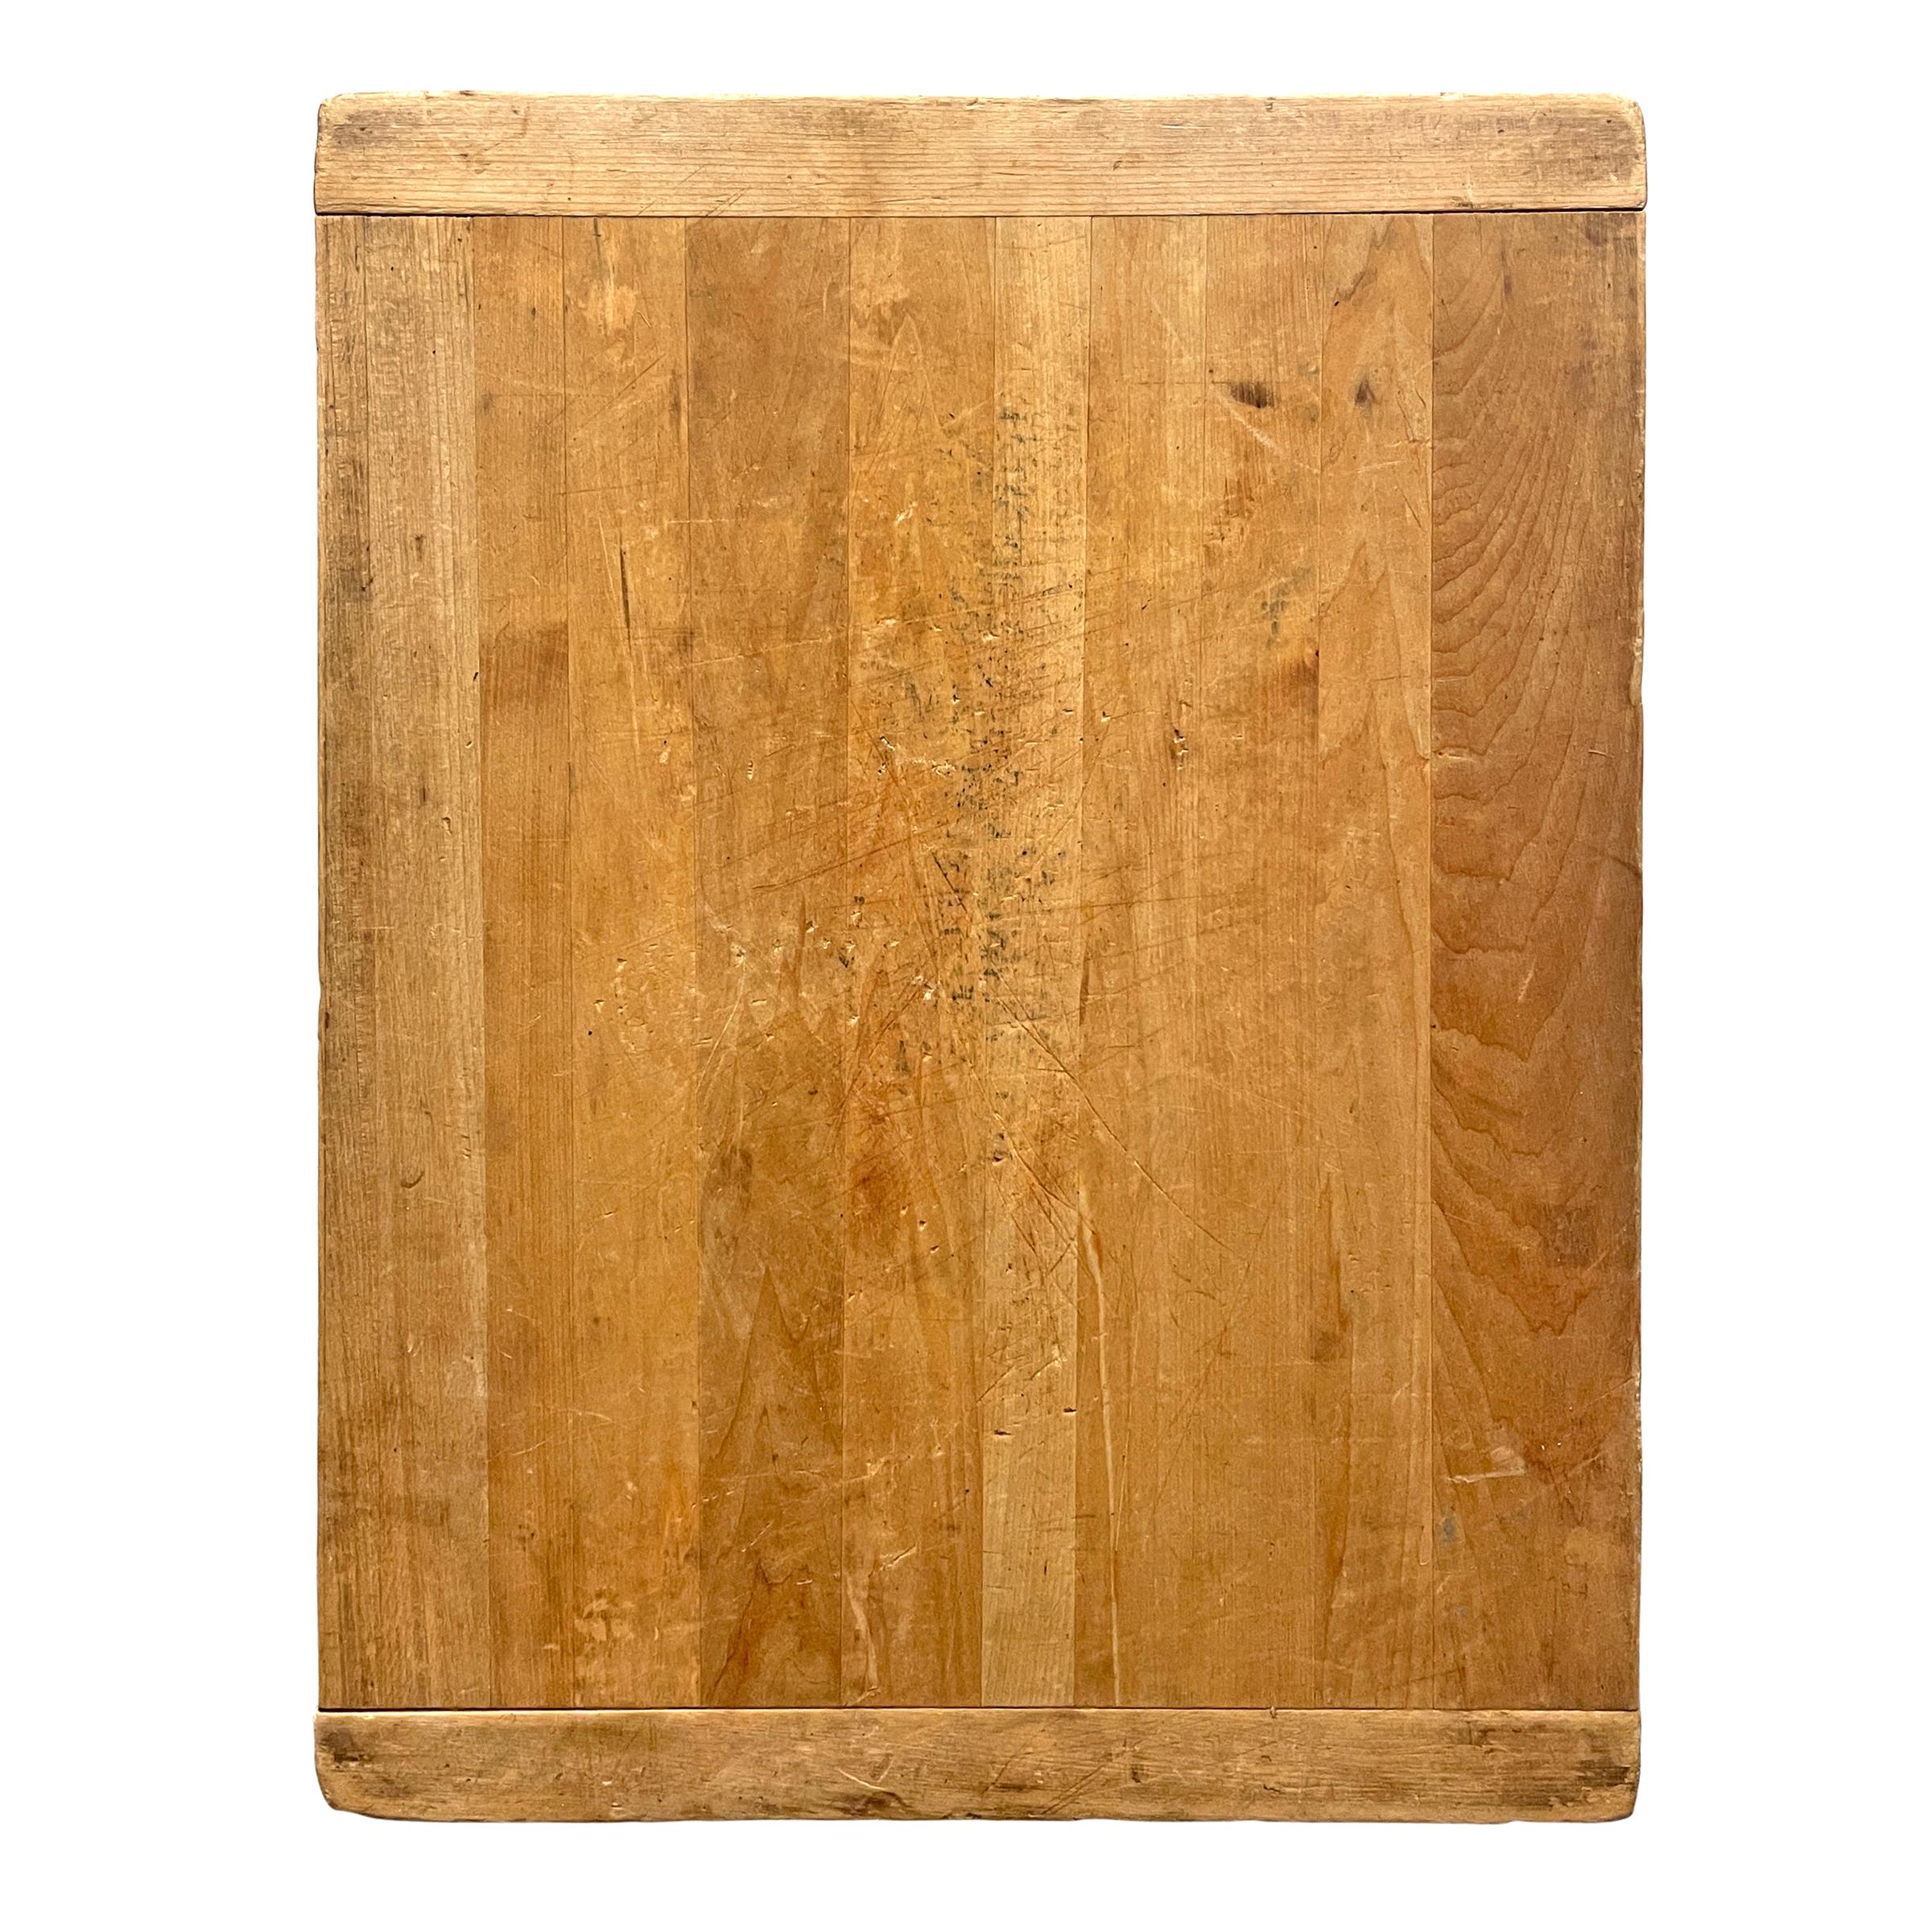 Early 20th Century American Maple Breadboard For Sale